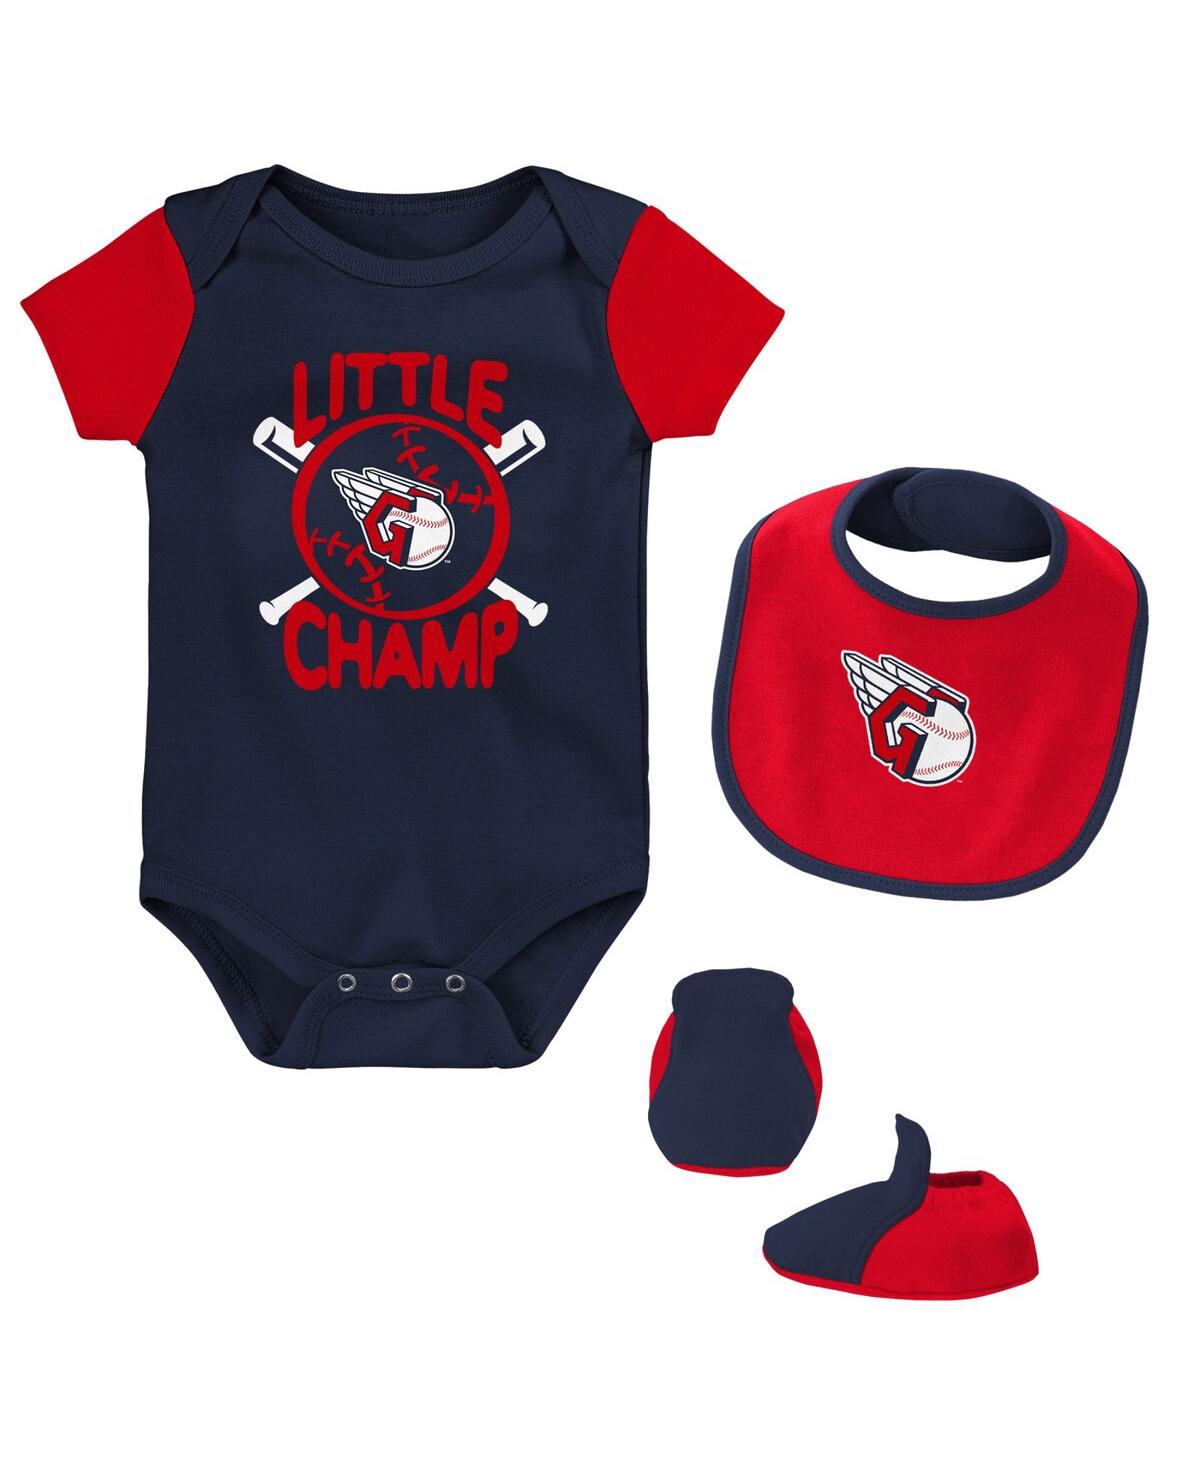 Outerstuff Babies' Newborn And Infant Boys And Girls Navy, Red Cleveland Guardians Little Champ Three-pack Bodysuit Bib In Navy,red